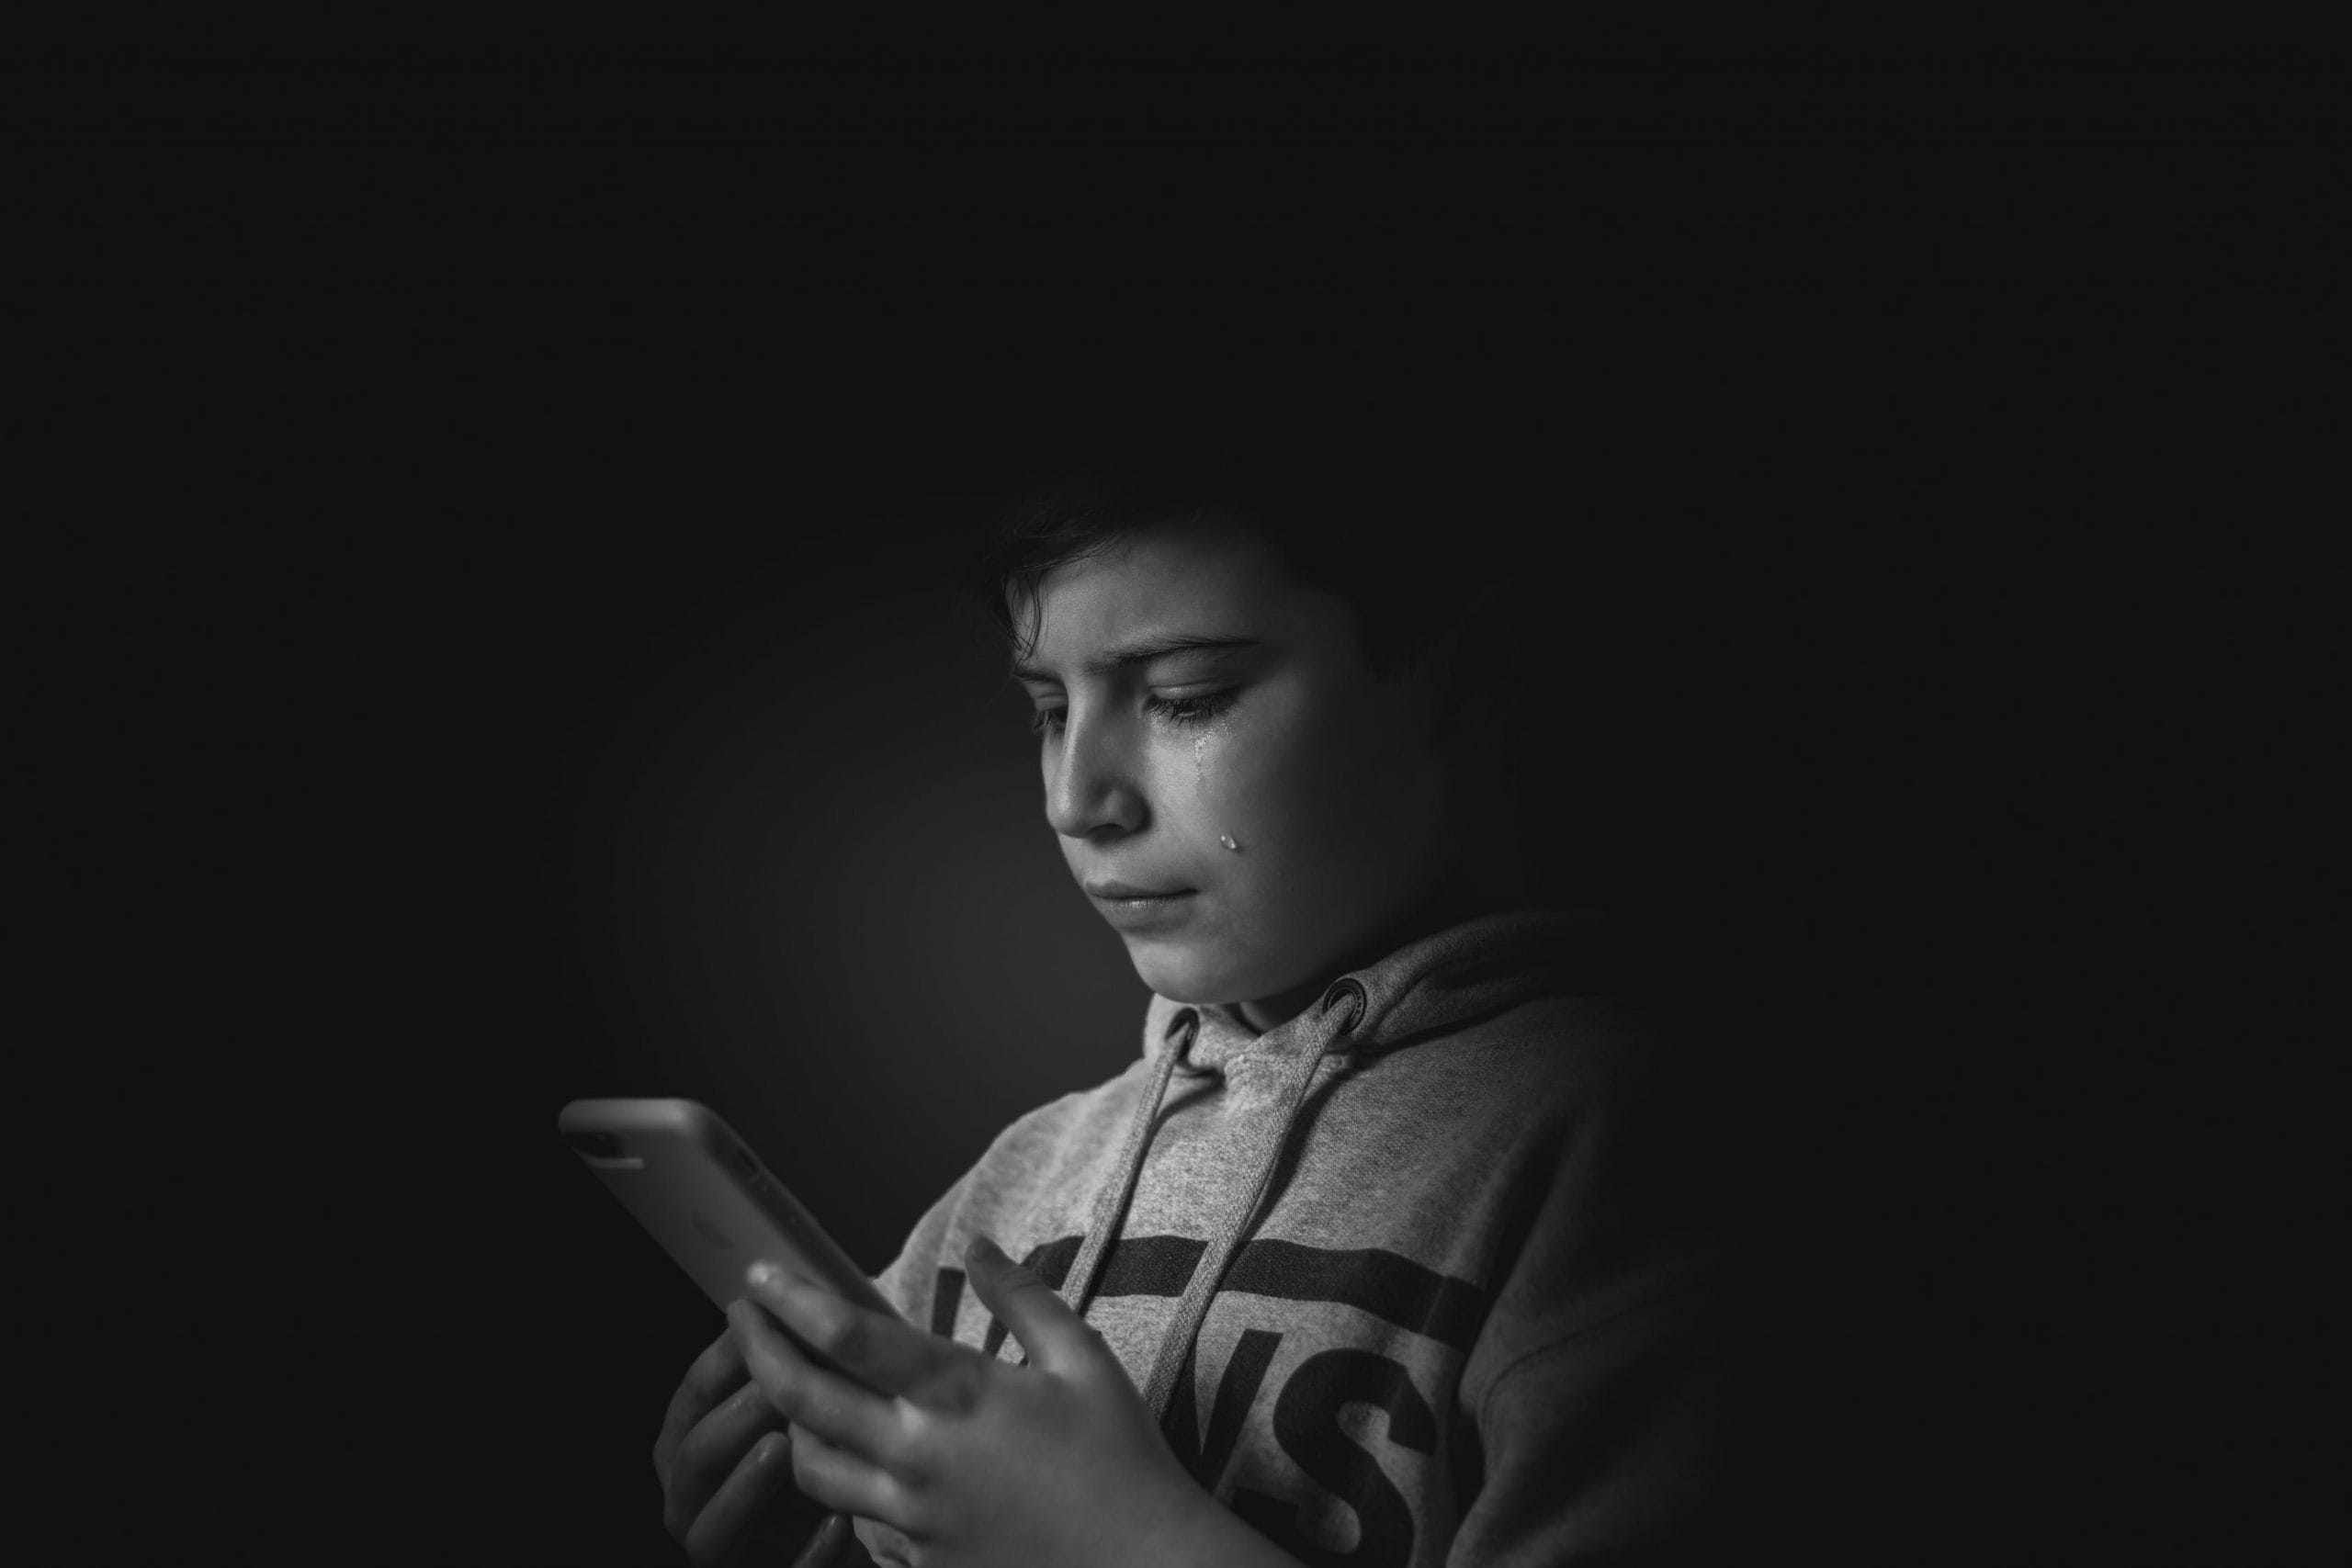 Kids are facing cyberbullying with 66% of parents being unaware